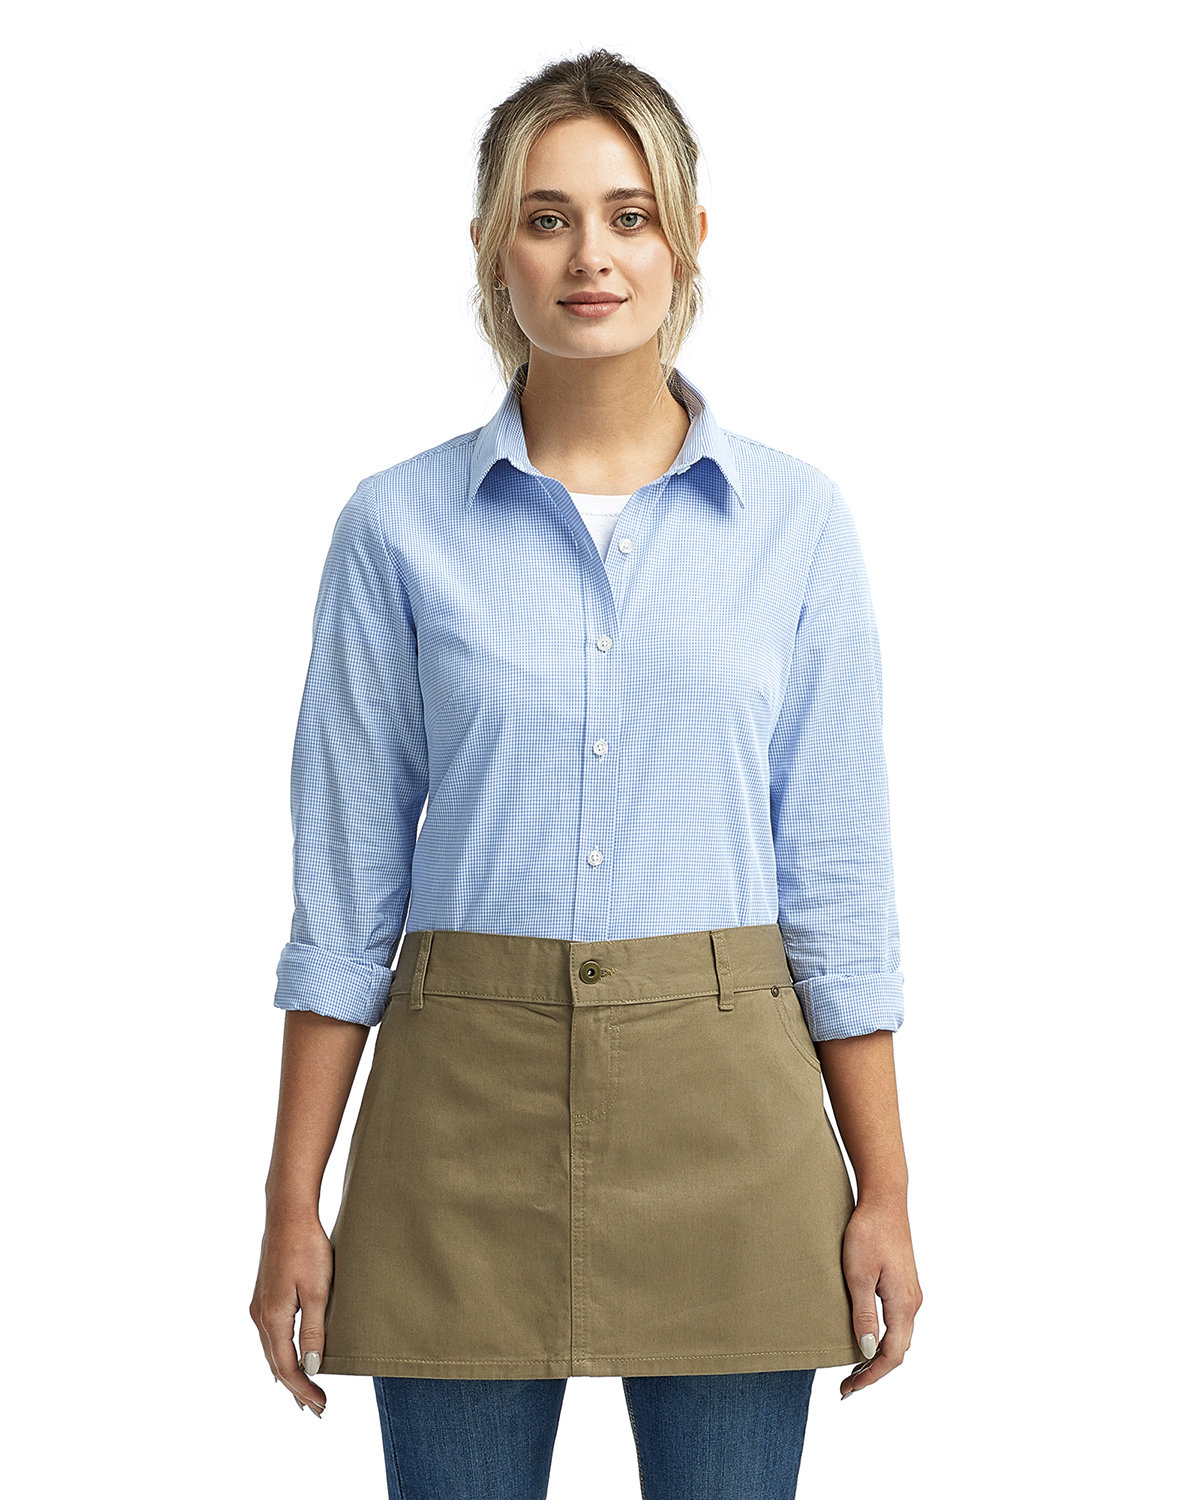 Unisex Cotton Chino Waist Apron-Artisan Collection by Reprime